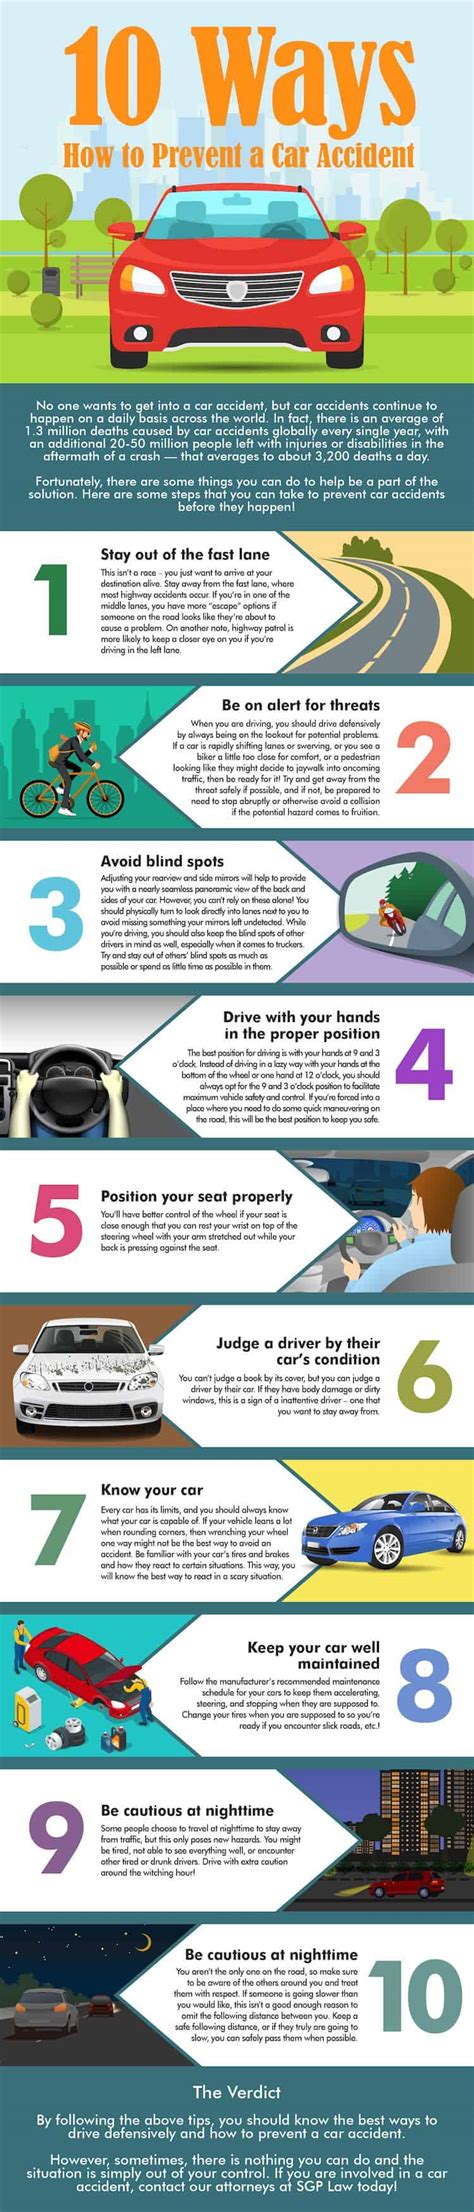 10 Ways To Prevent A Car Accident And Stay Safe 2024